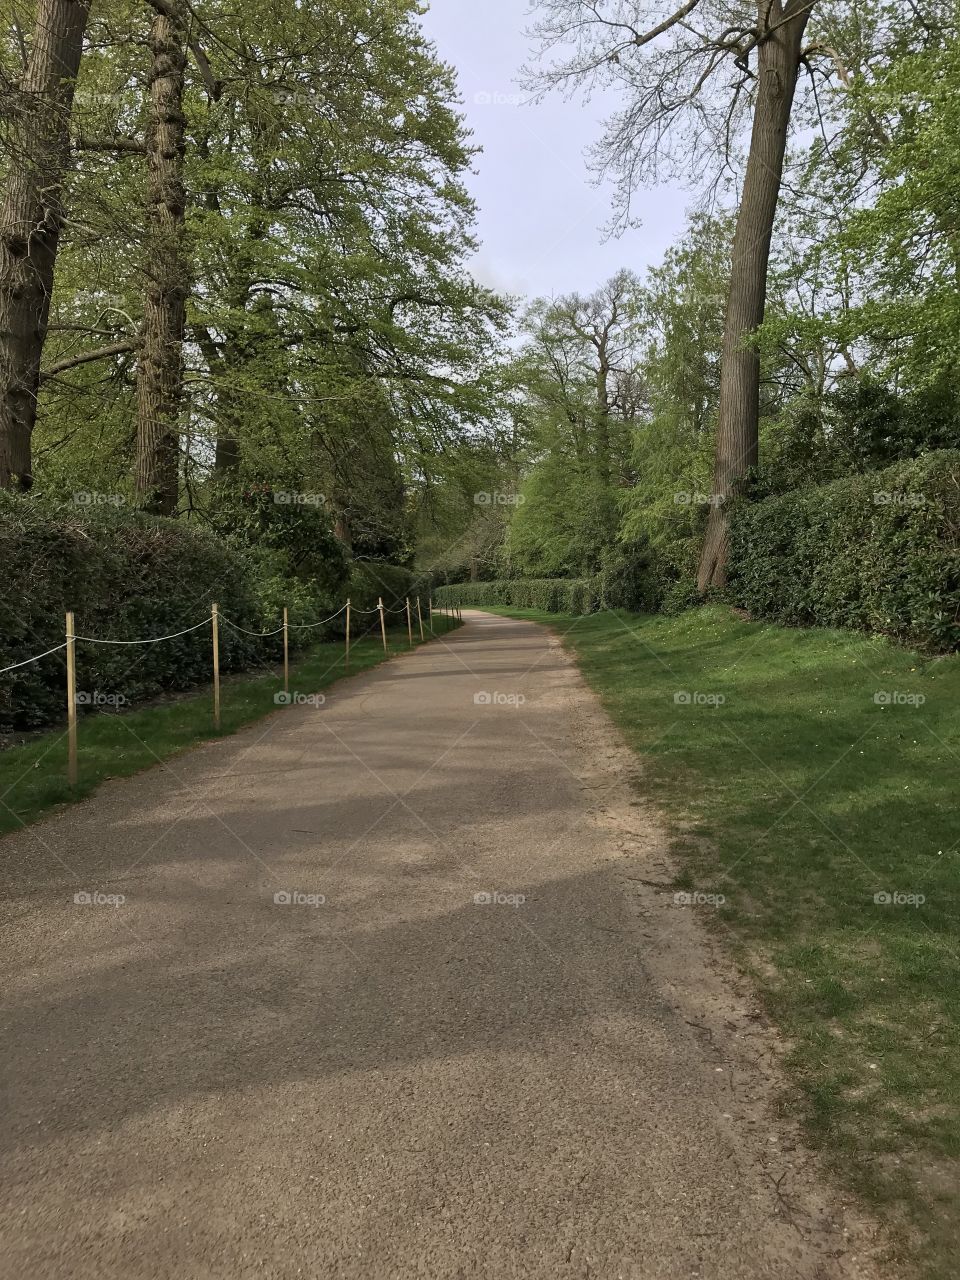 Walking in the green park, somewhere in England 